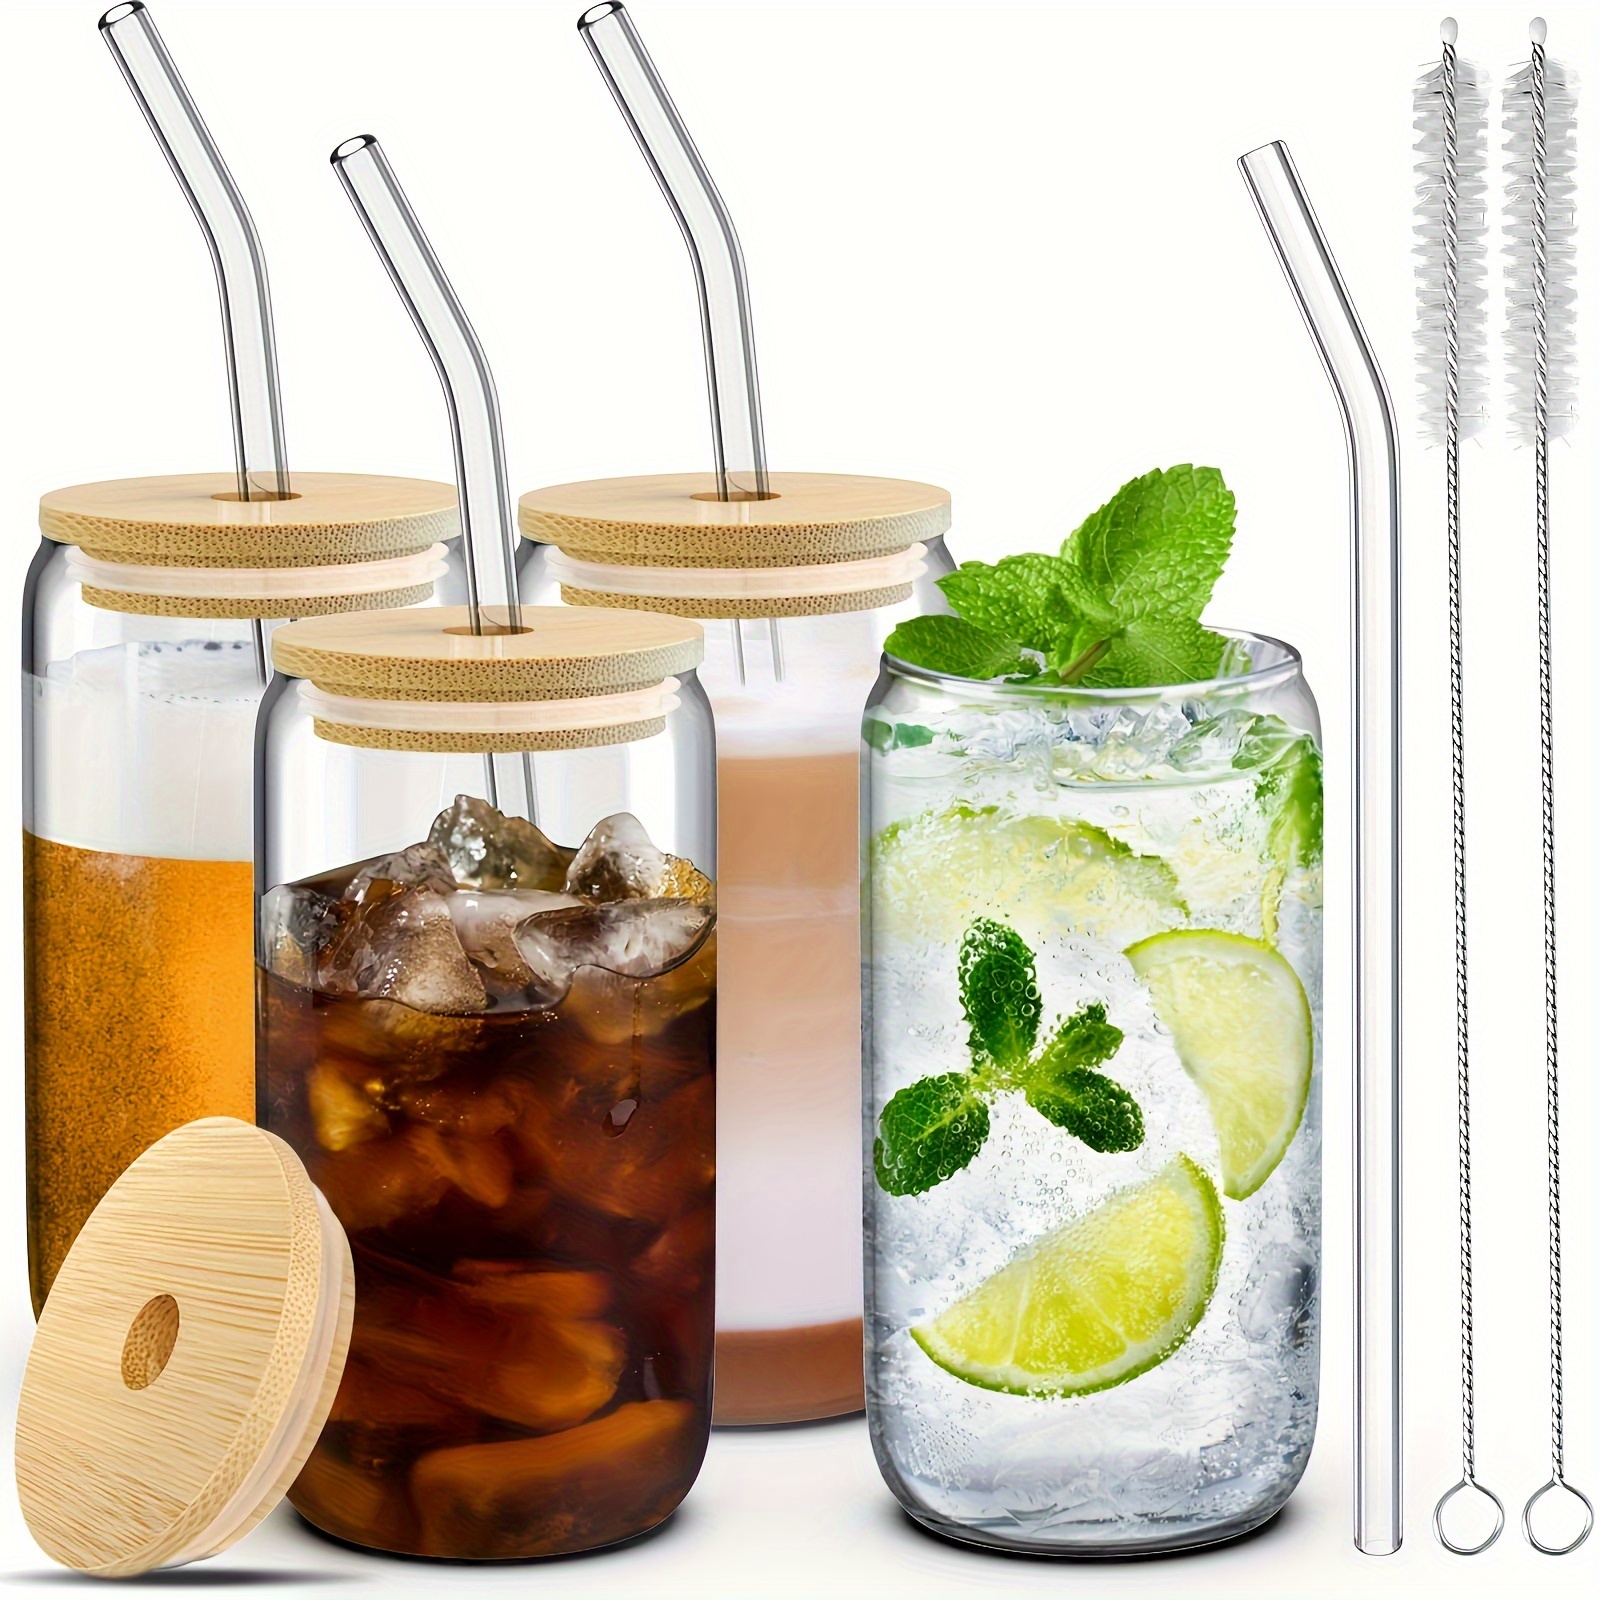  Scoozee Drinking Glasses with Straws (Set of 4, 18 oz) - Glass  Cups with Glass Straws - Glass Tumbler for Iced Coffee, Beer, Tea -  Aesthetic Cute Coffee Bar Accessories : Home & Kitchen